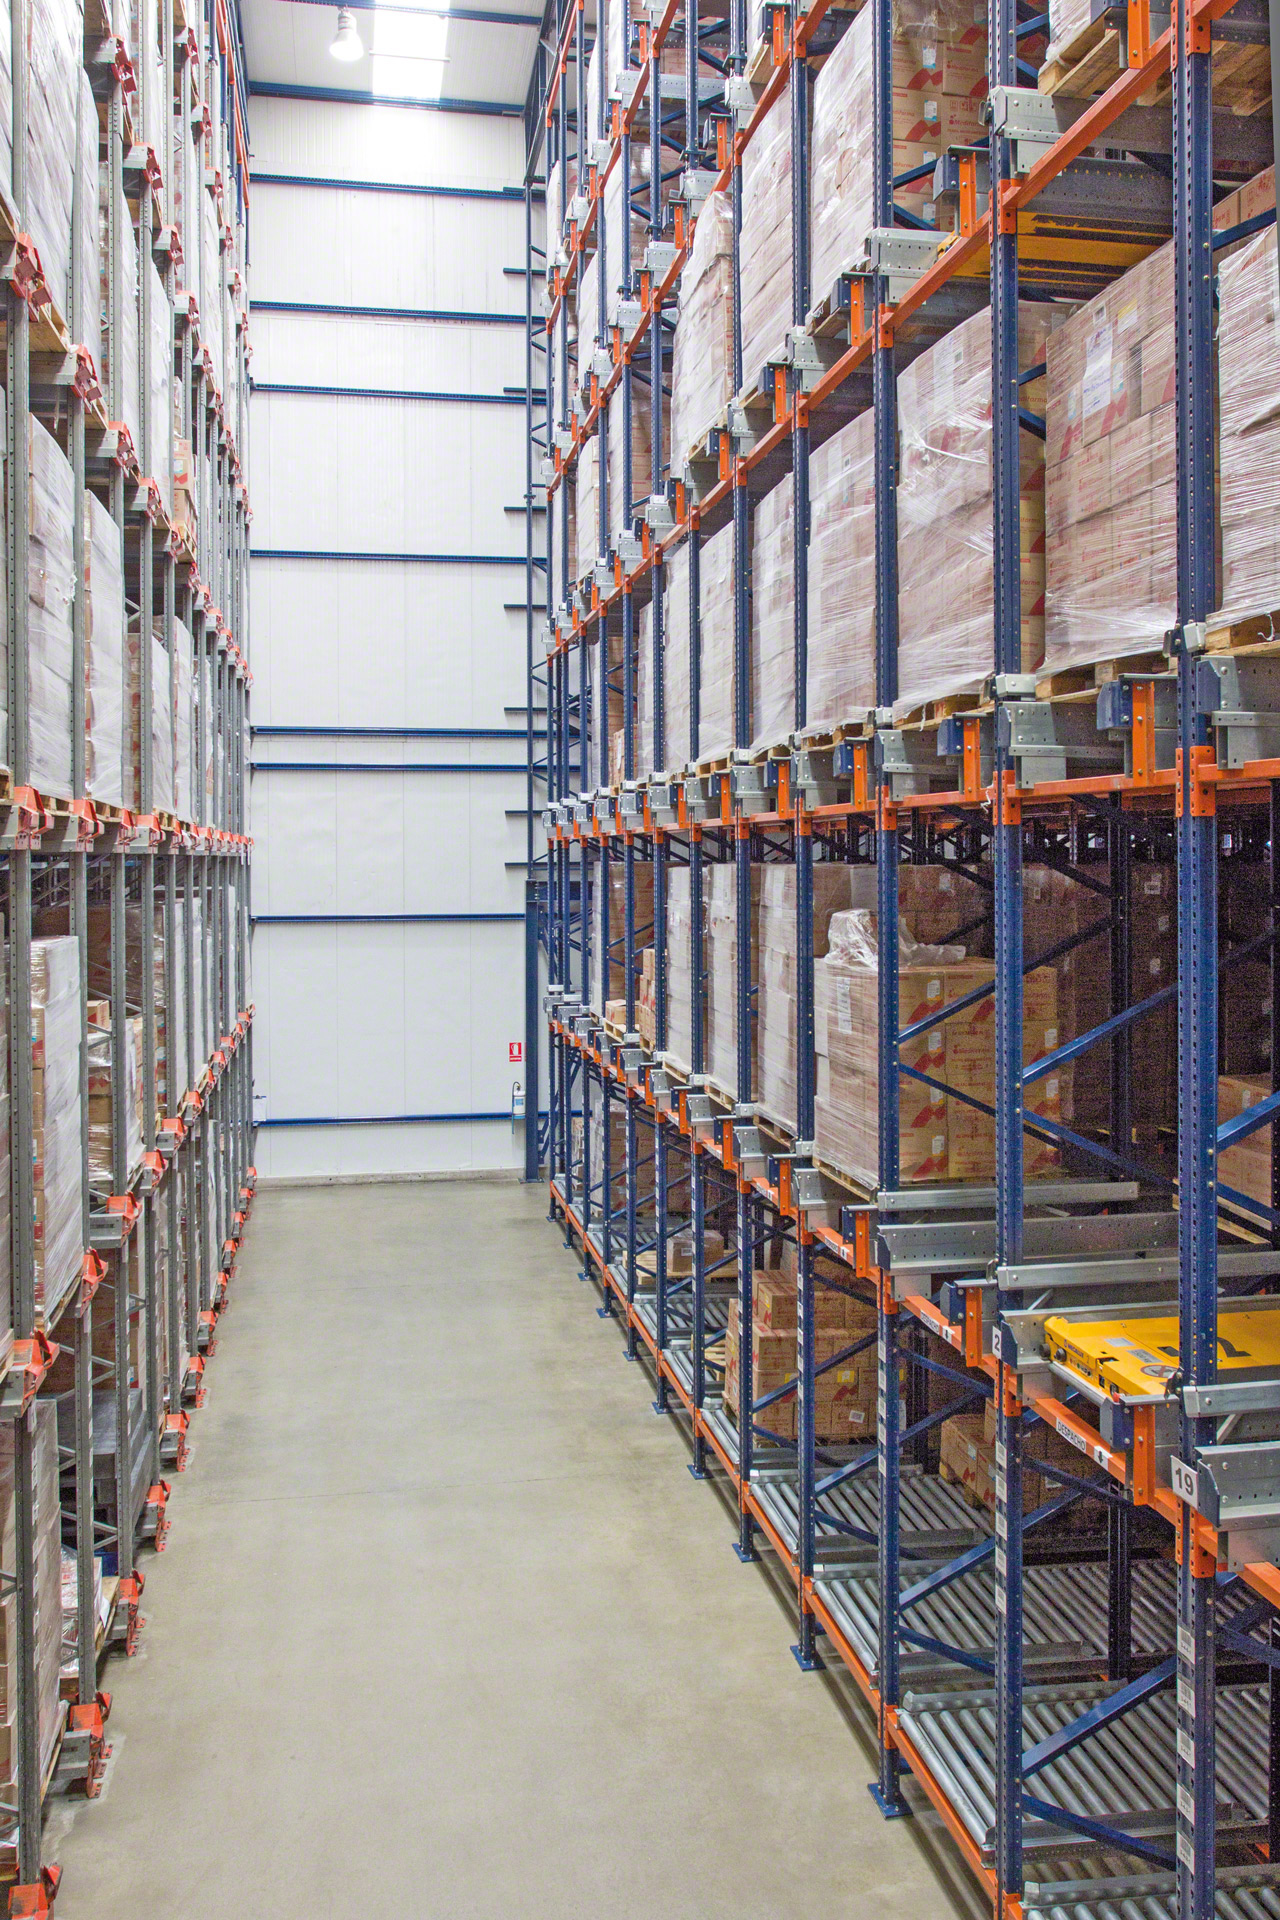 The Pallet Shuttle can withstand temperatures up to -22°, making it the best solution for cold storage environments